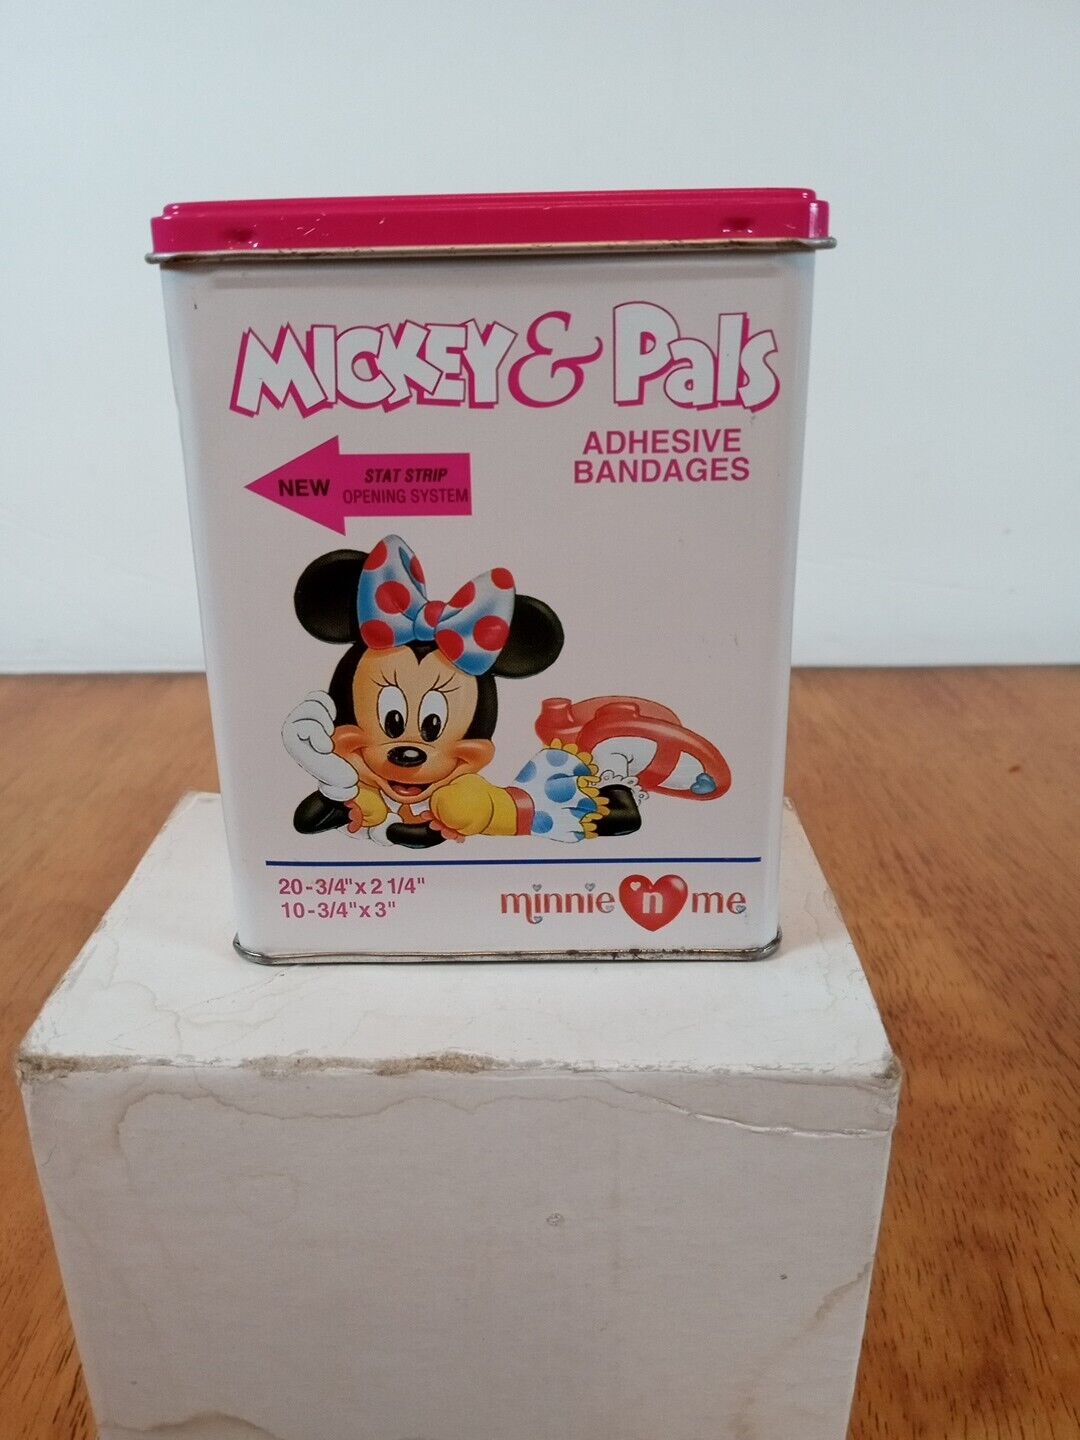 Vintage Mickey Mouse and Pals Band-Aids Bandages Minnie N Me - New Old Stock 